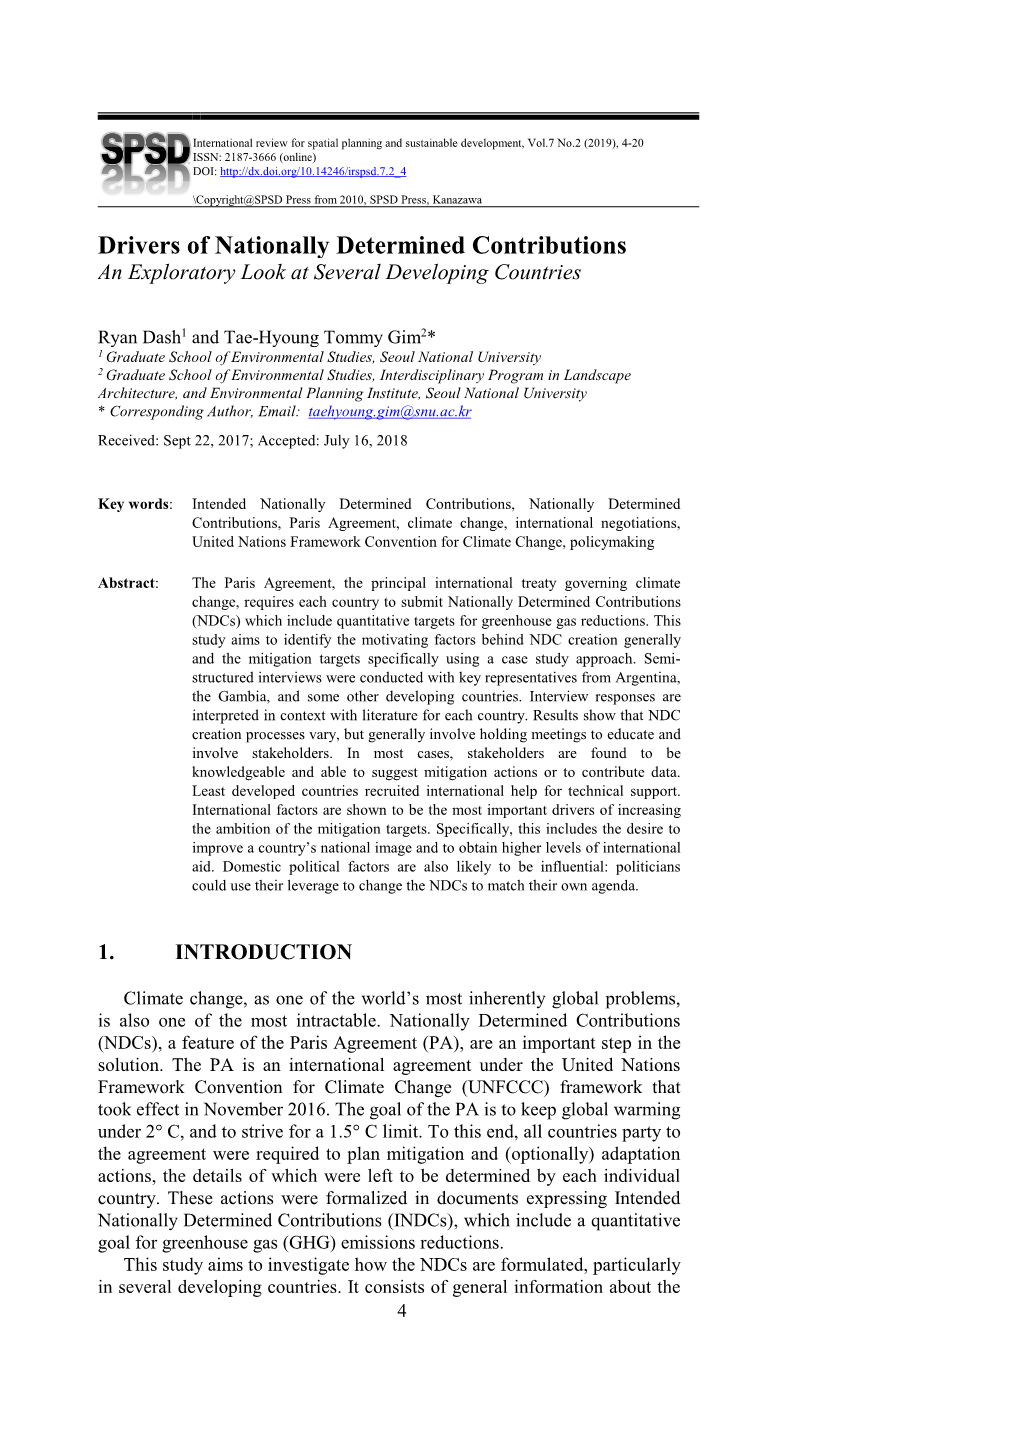 Drivers of Nationally Determined Contributions an Exploratory Look at Several Developing Countries